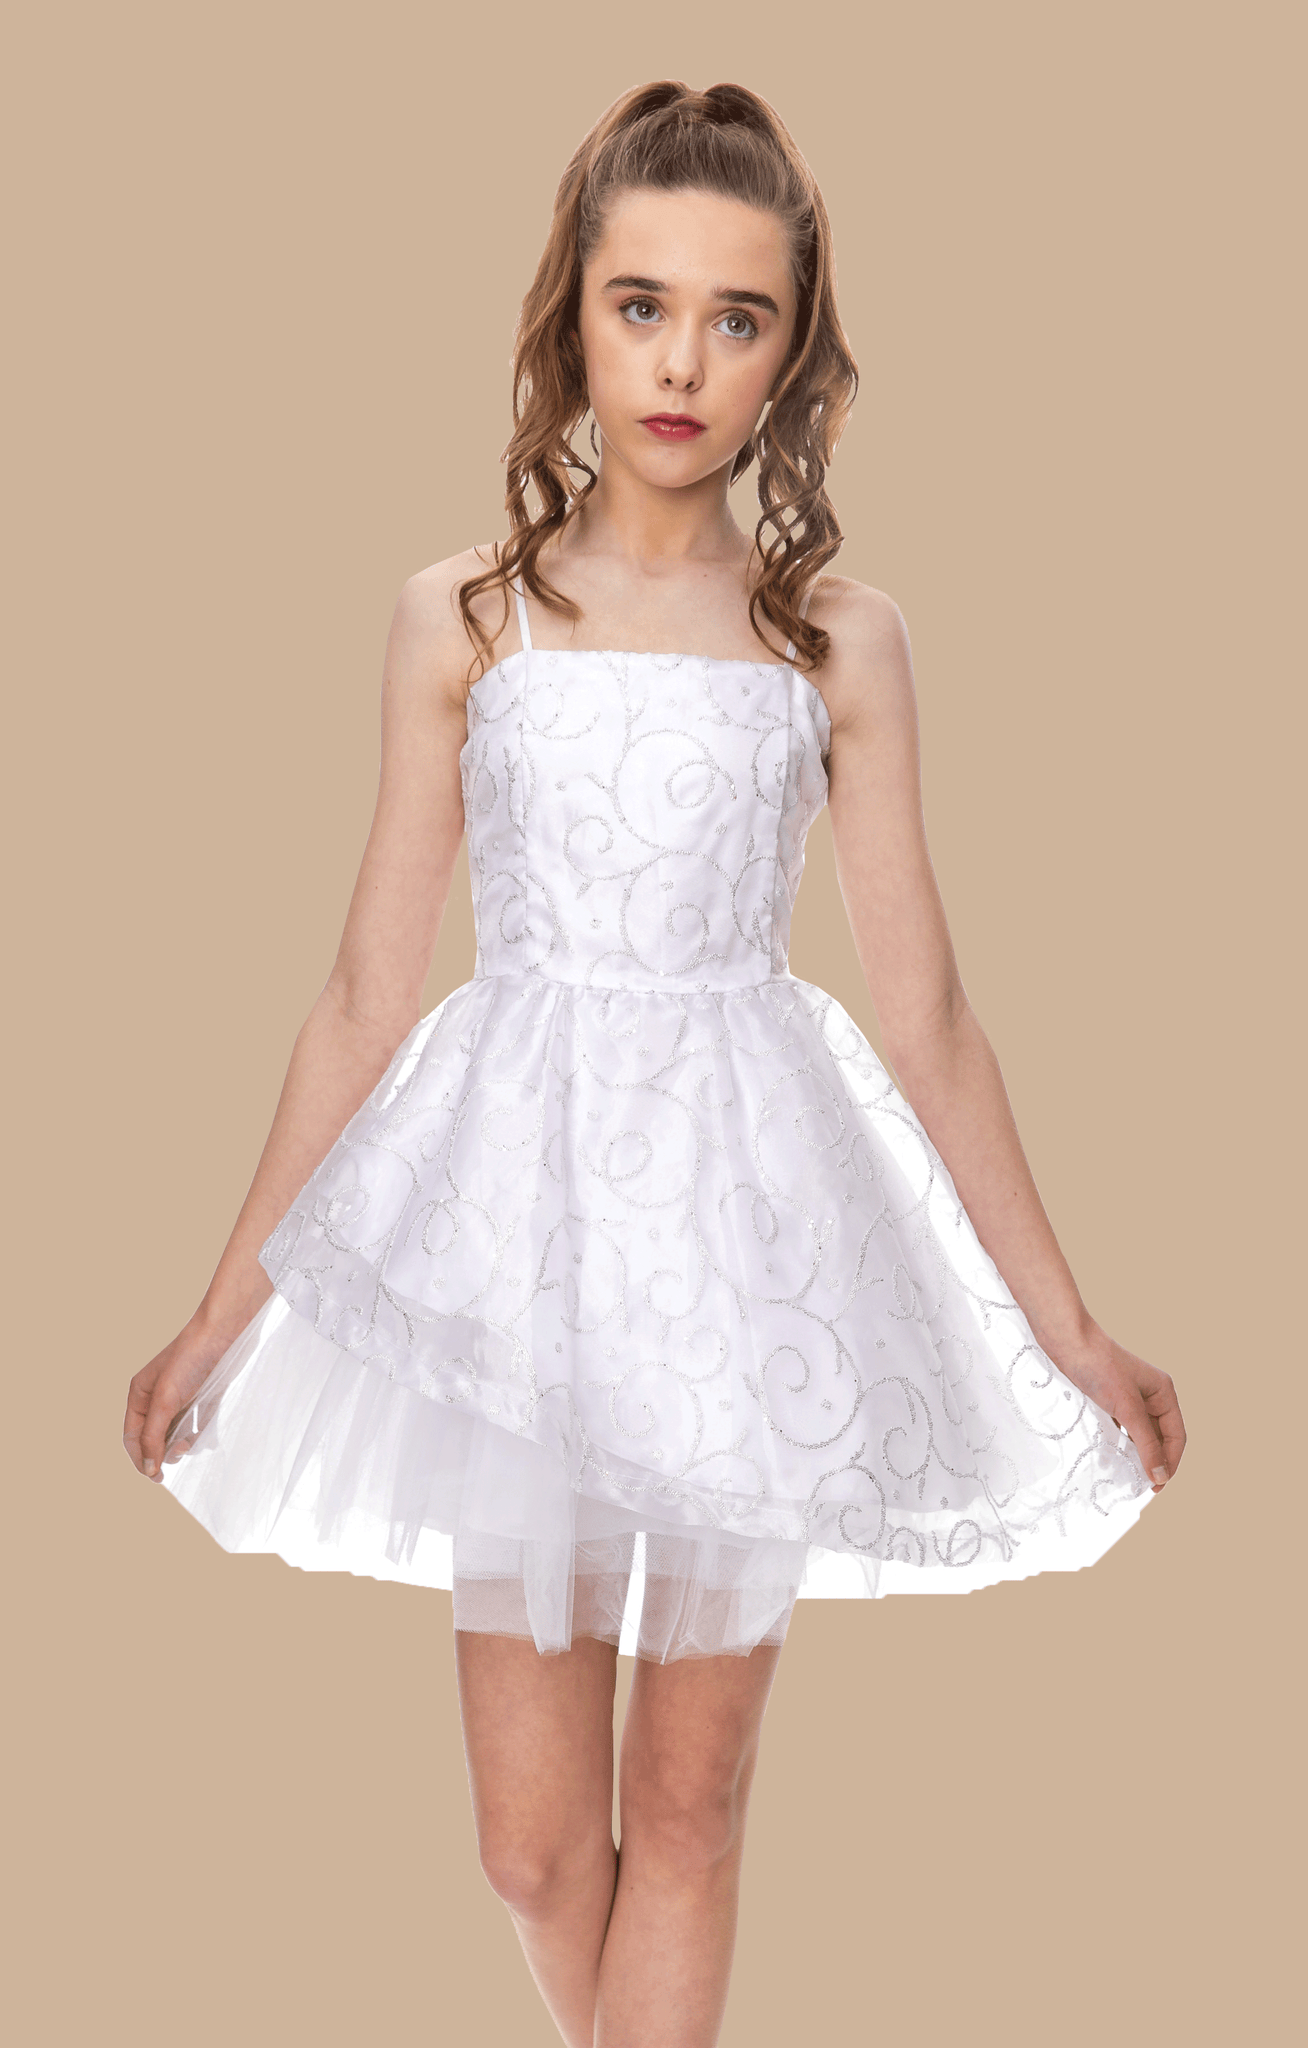 Blonde girl in a white fit and flare dress with tulle skirt,